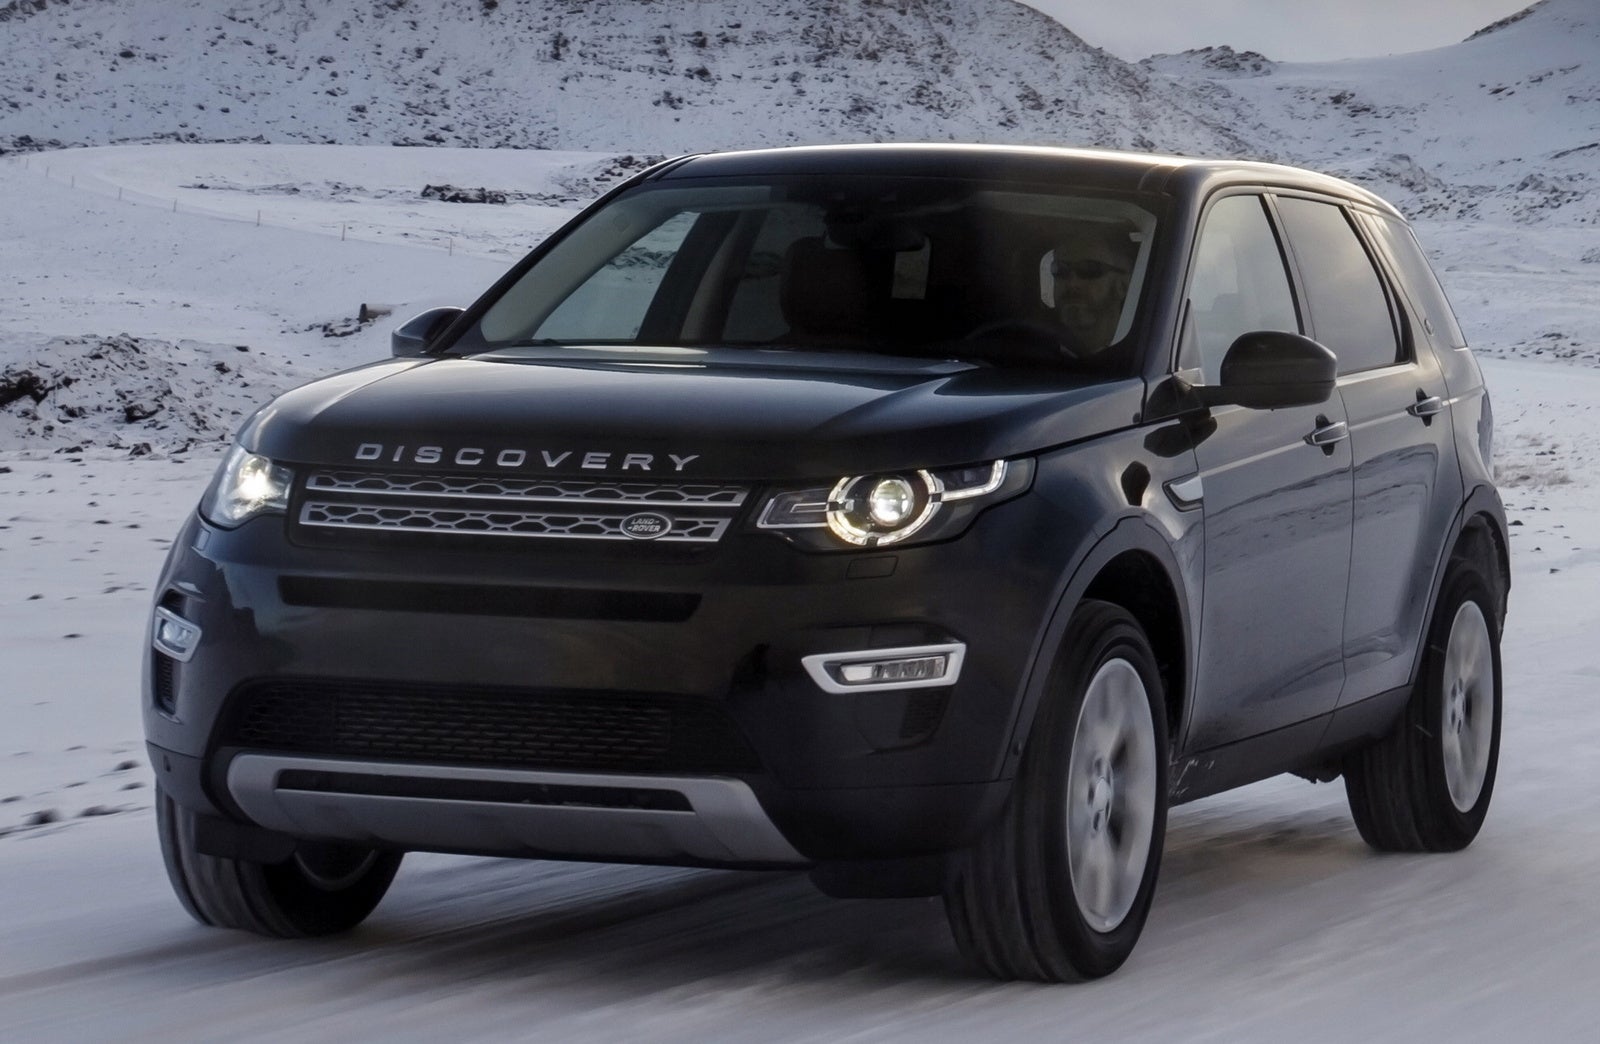 2015 Land Rover Discovery Sport Review CarGurus